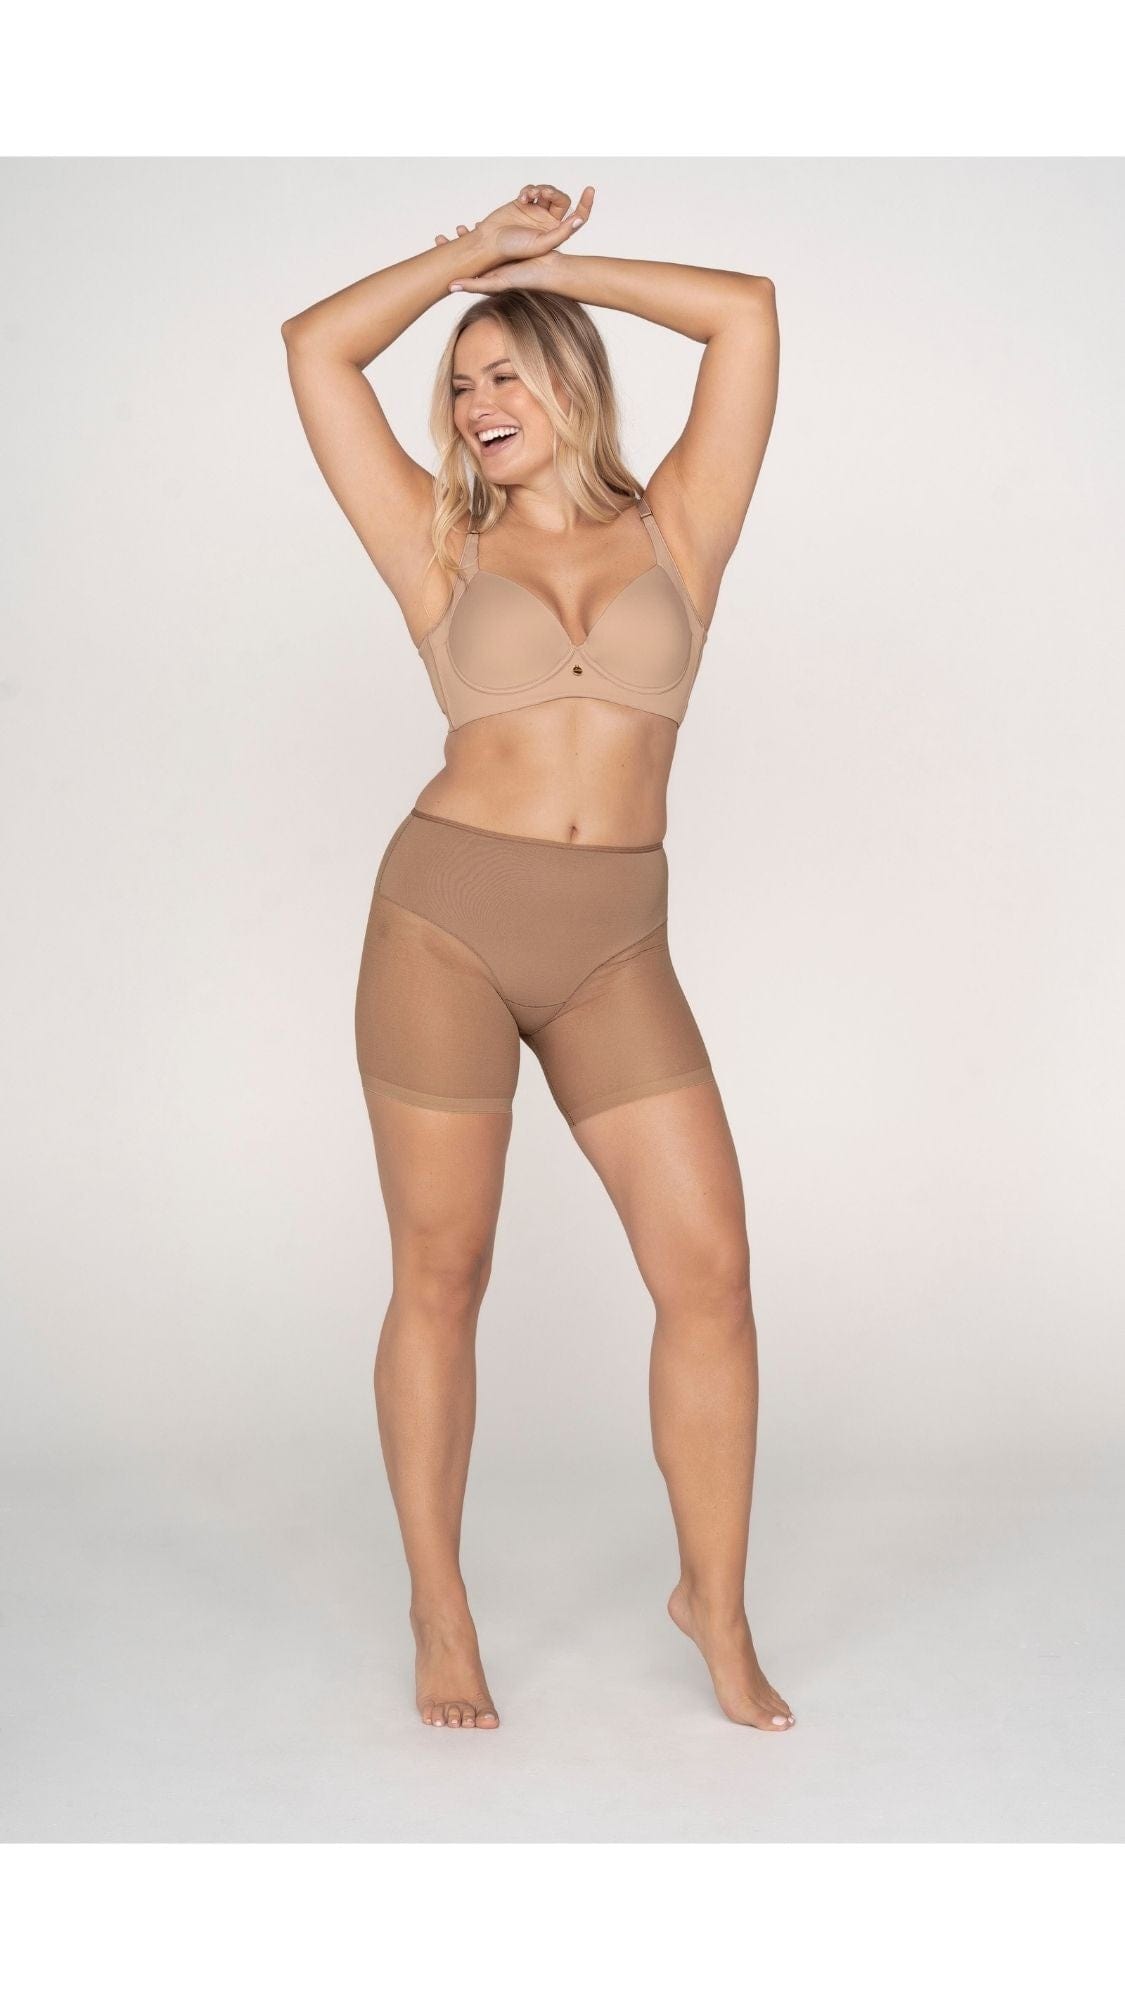 Undetectable Step-In Mid-Thigh Body Shaper - Nude - Chérie Amour